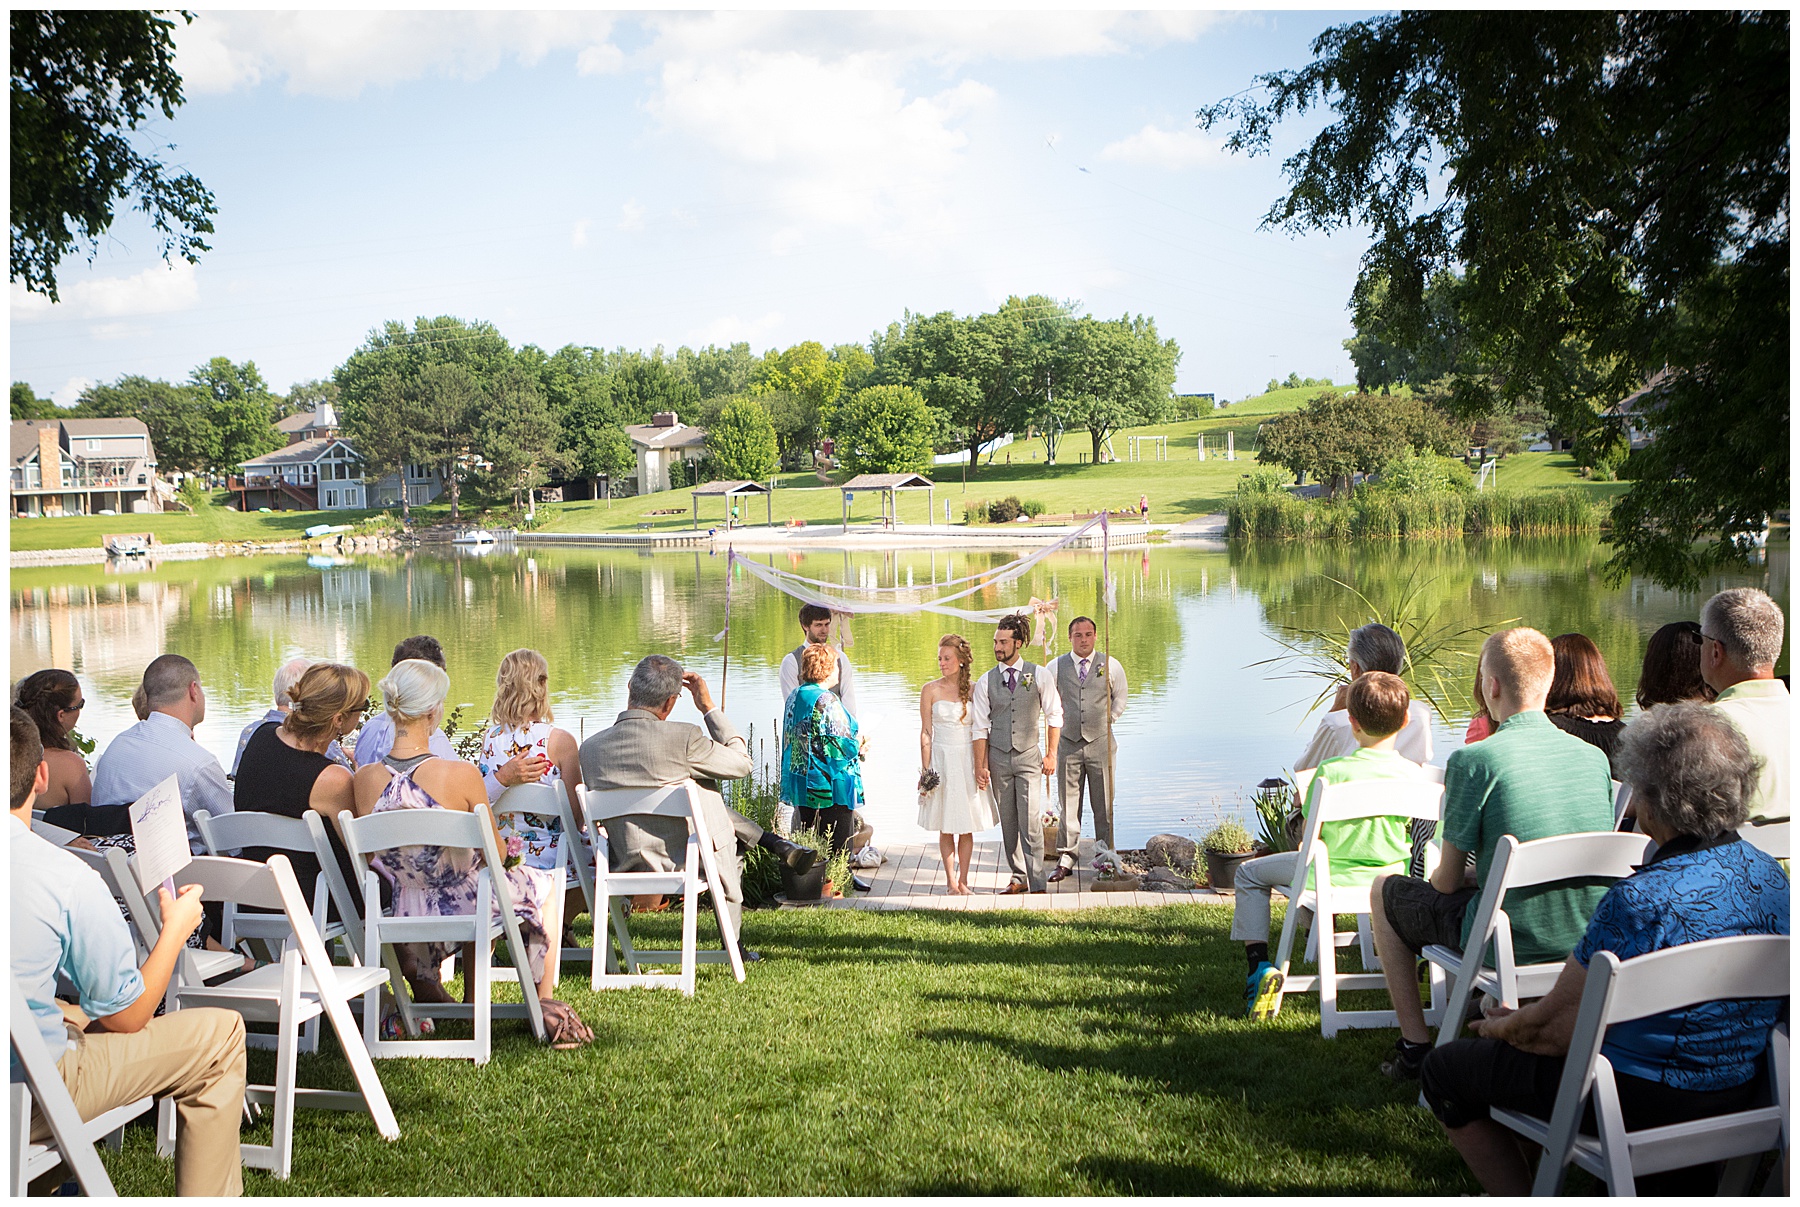 Backyard wedding in Omaha,Andrea Bibeault: a wedding photojournalist specializes in real,photojournalistic wedding photography. Based in Omaha,we travel all over the midwest and country.,